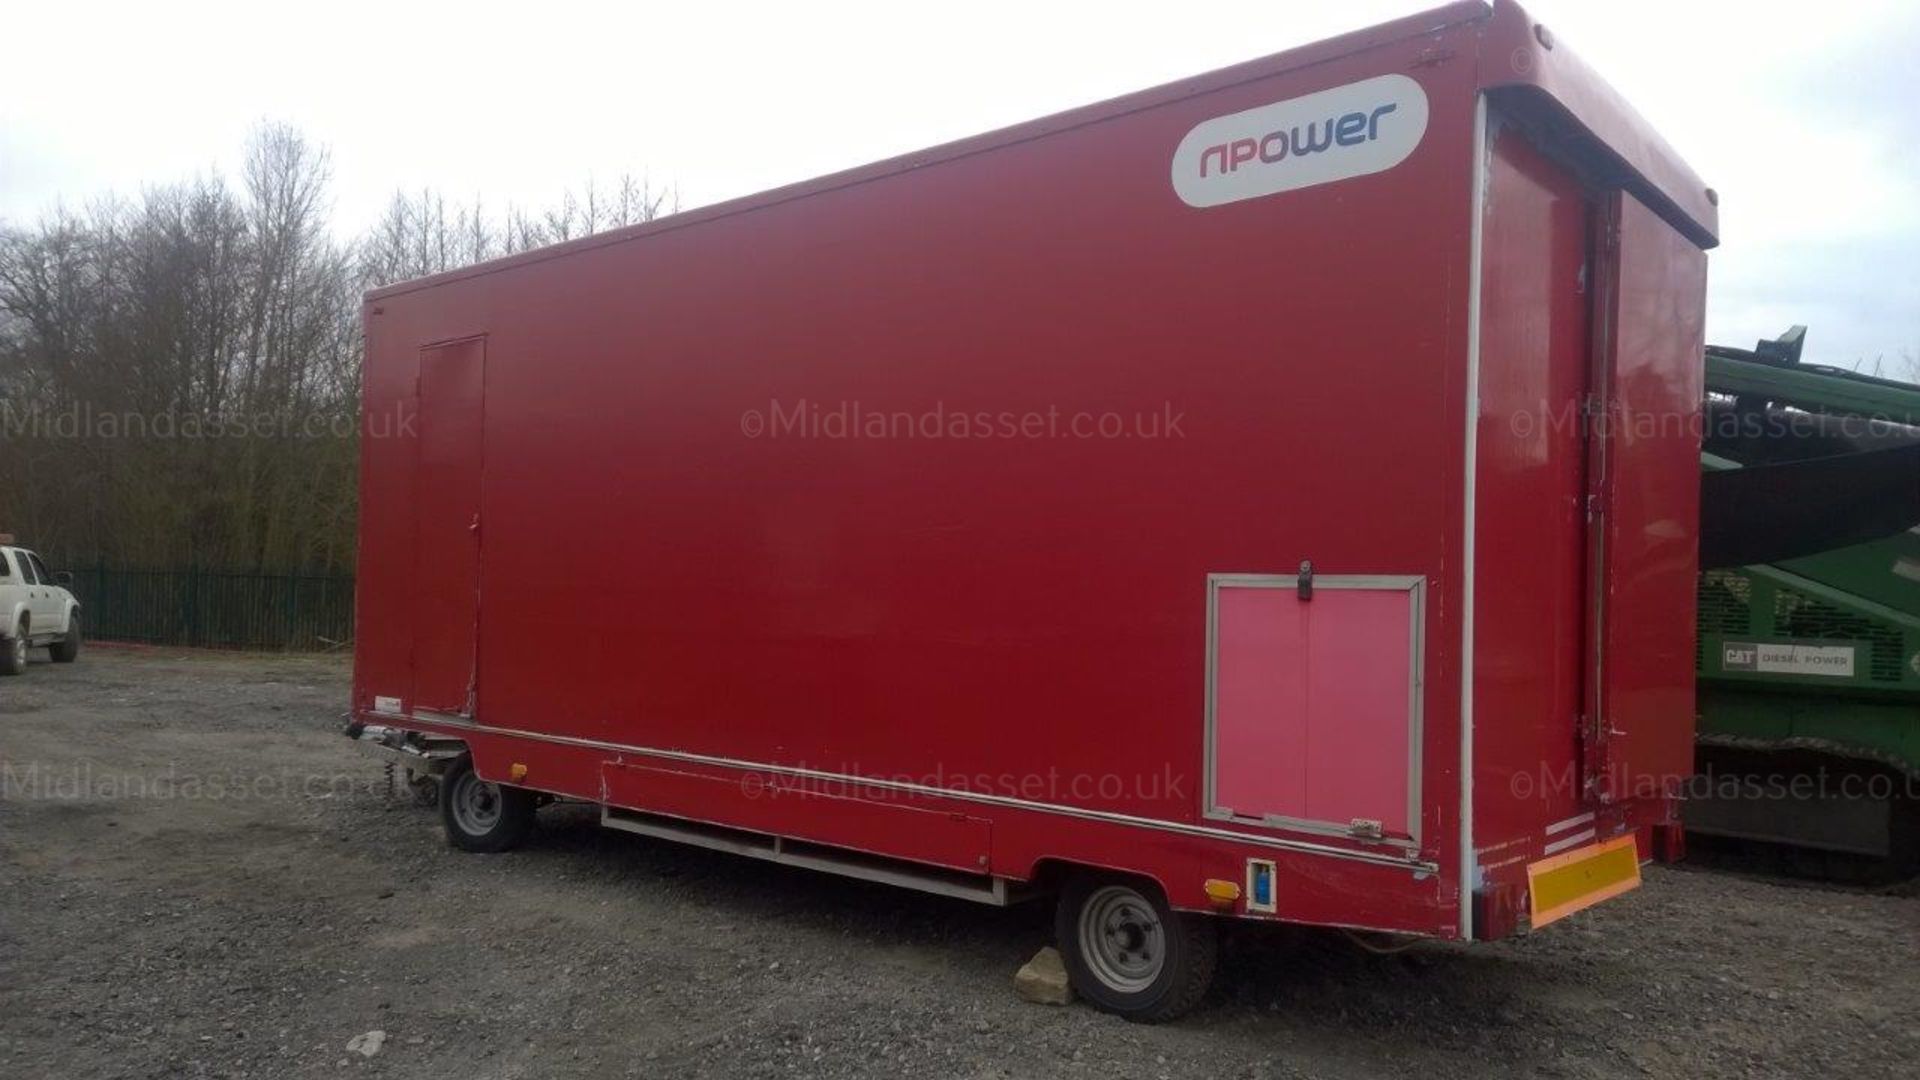 DS - EXHIBITION TRAILER   GROSS WEIGHT: 3,500 kg   FITTED WITH A MICROWAVE, SINK AND FRIDGE (UN-